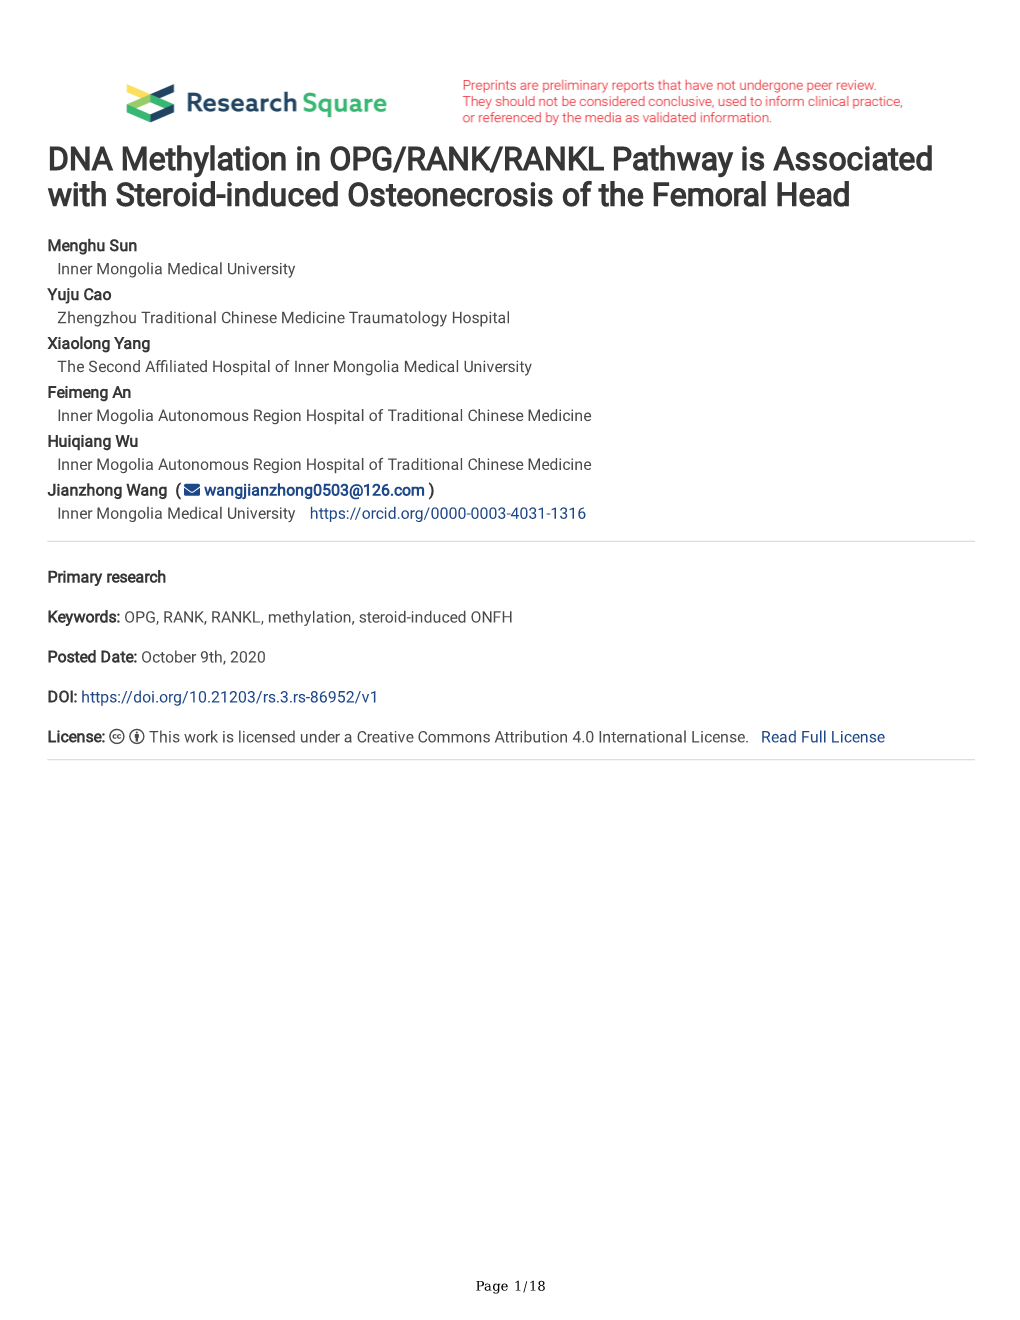 DNA Methylation in OPG/RANK/RANKL Pathway Is Associated with Steroid-Induced Osteonecrosis of the Femoral Head